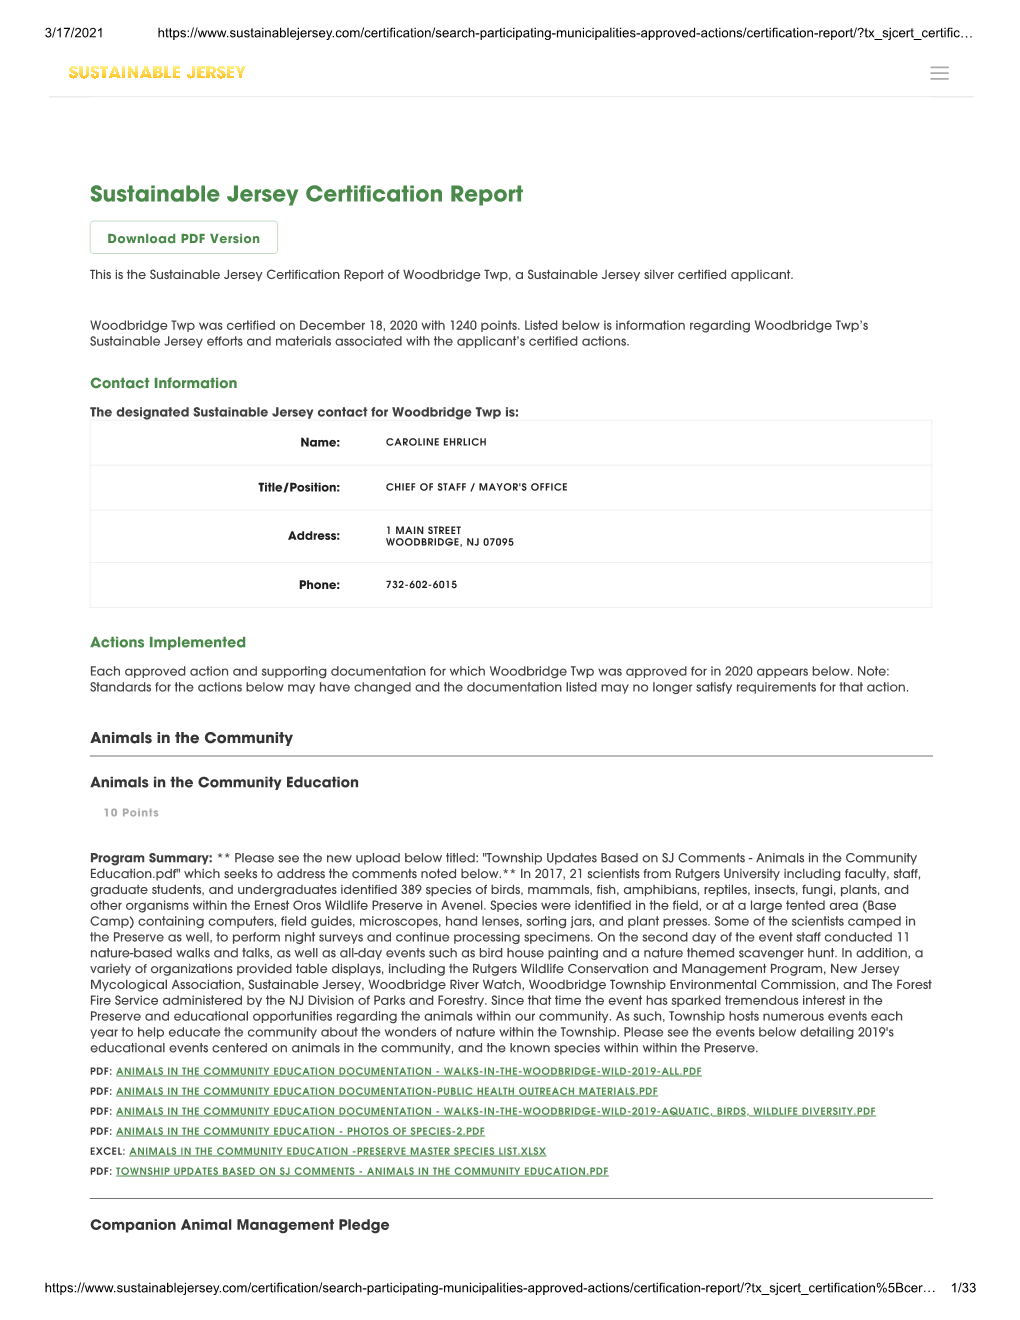 View Certification Report